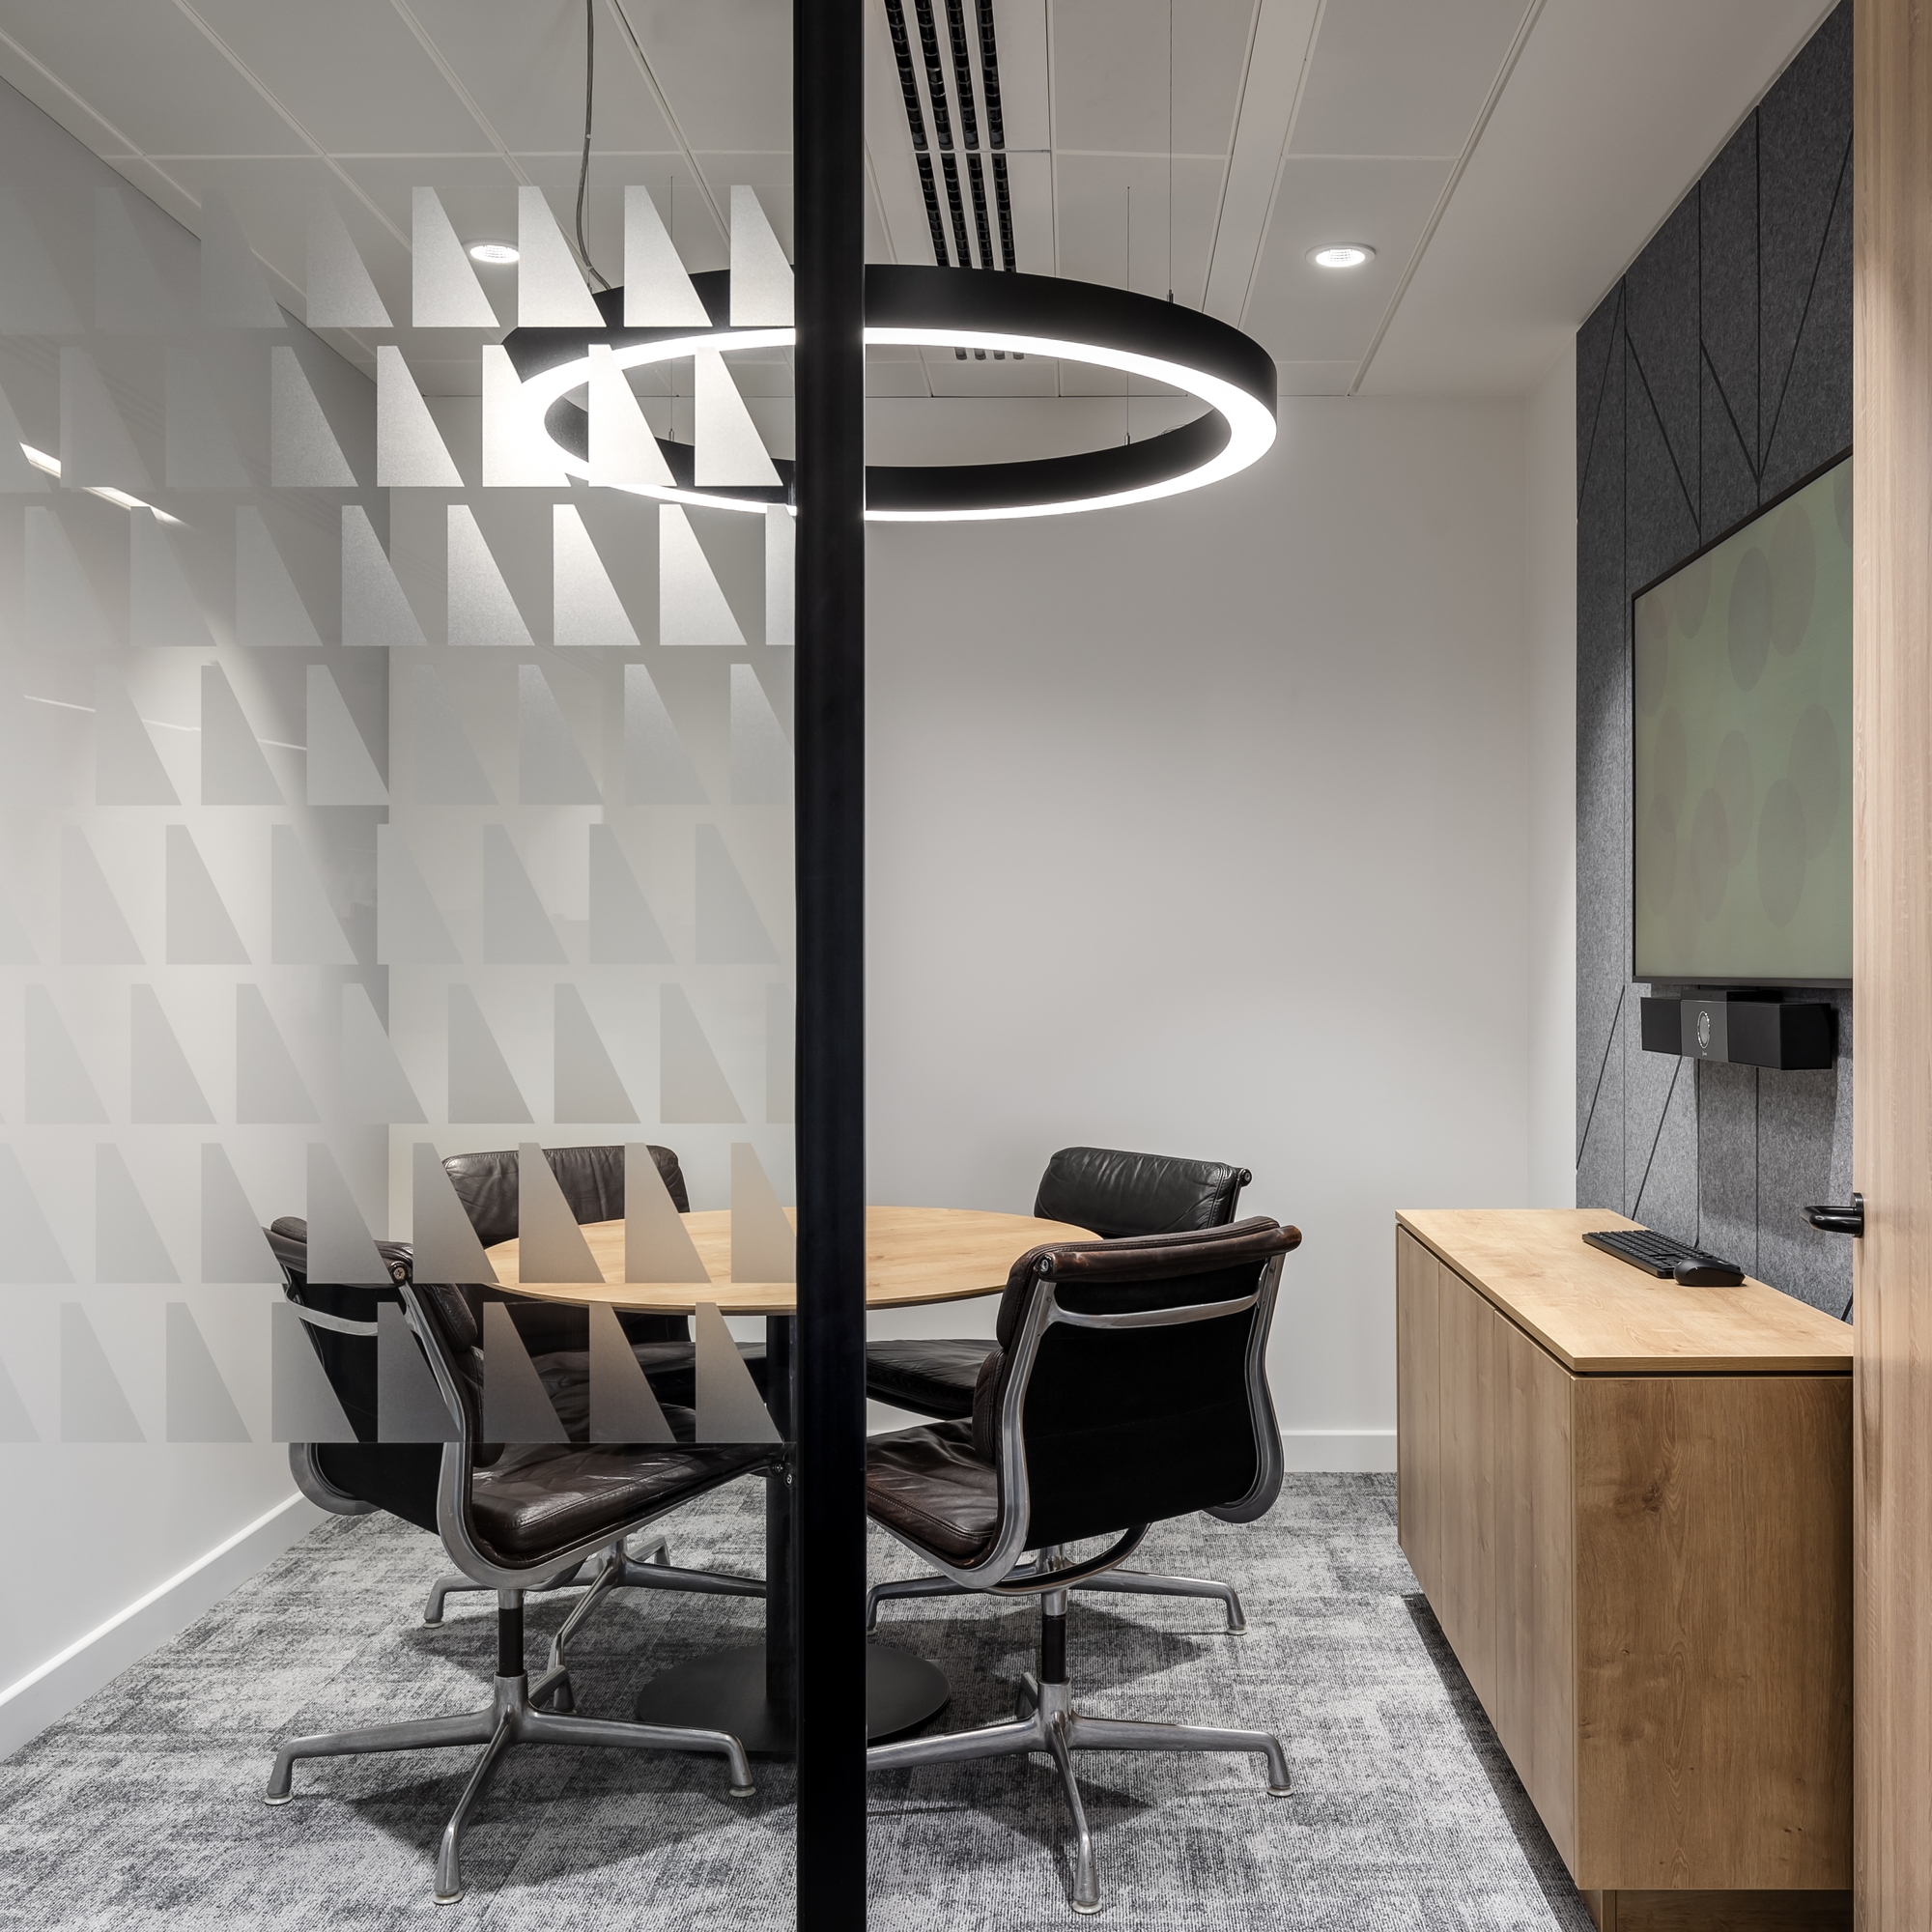 Armstrong Teasdale Offices - London | Office Snapshots